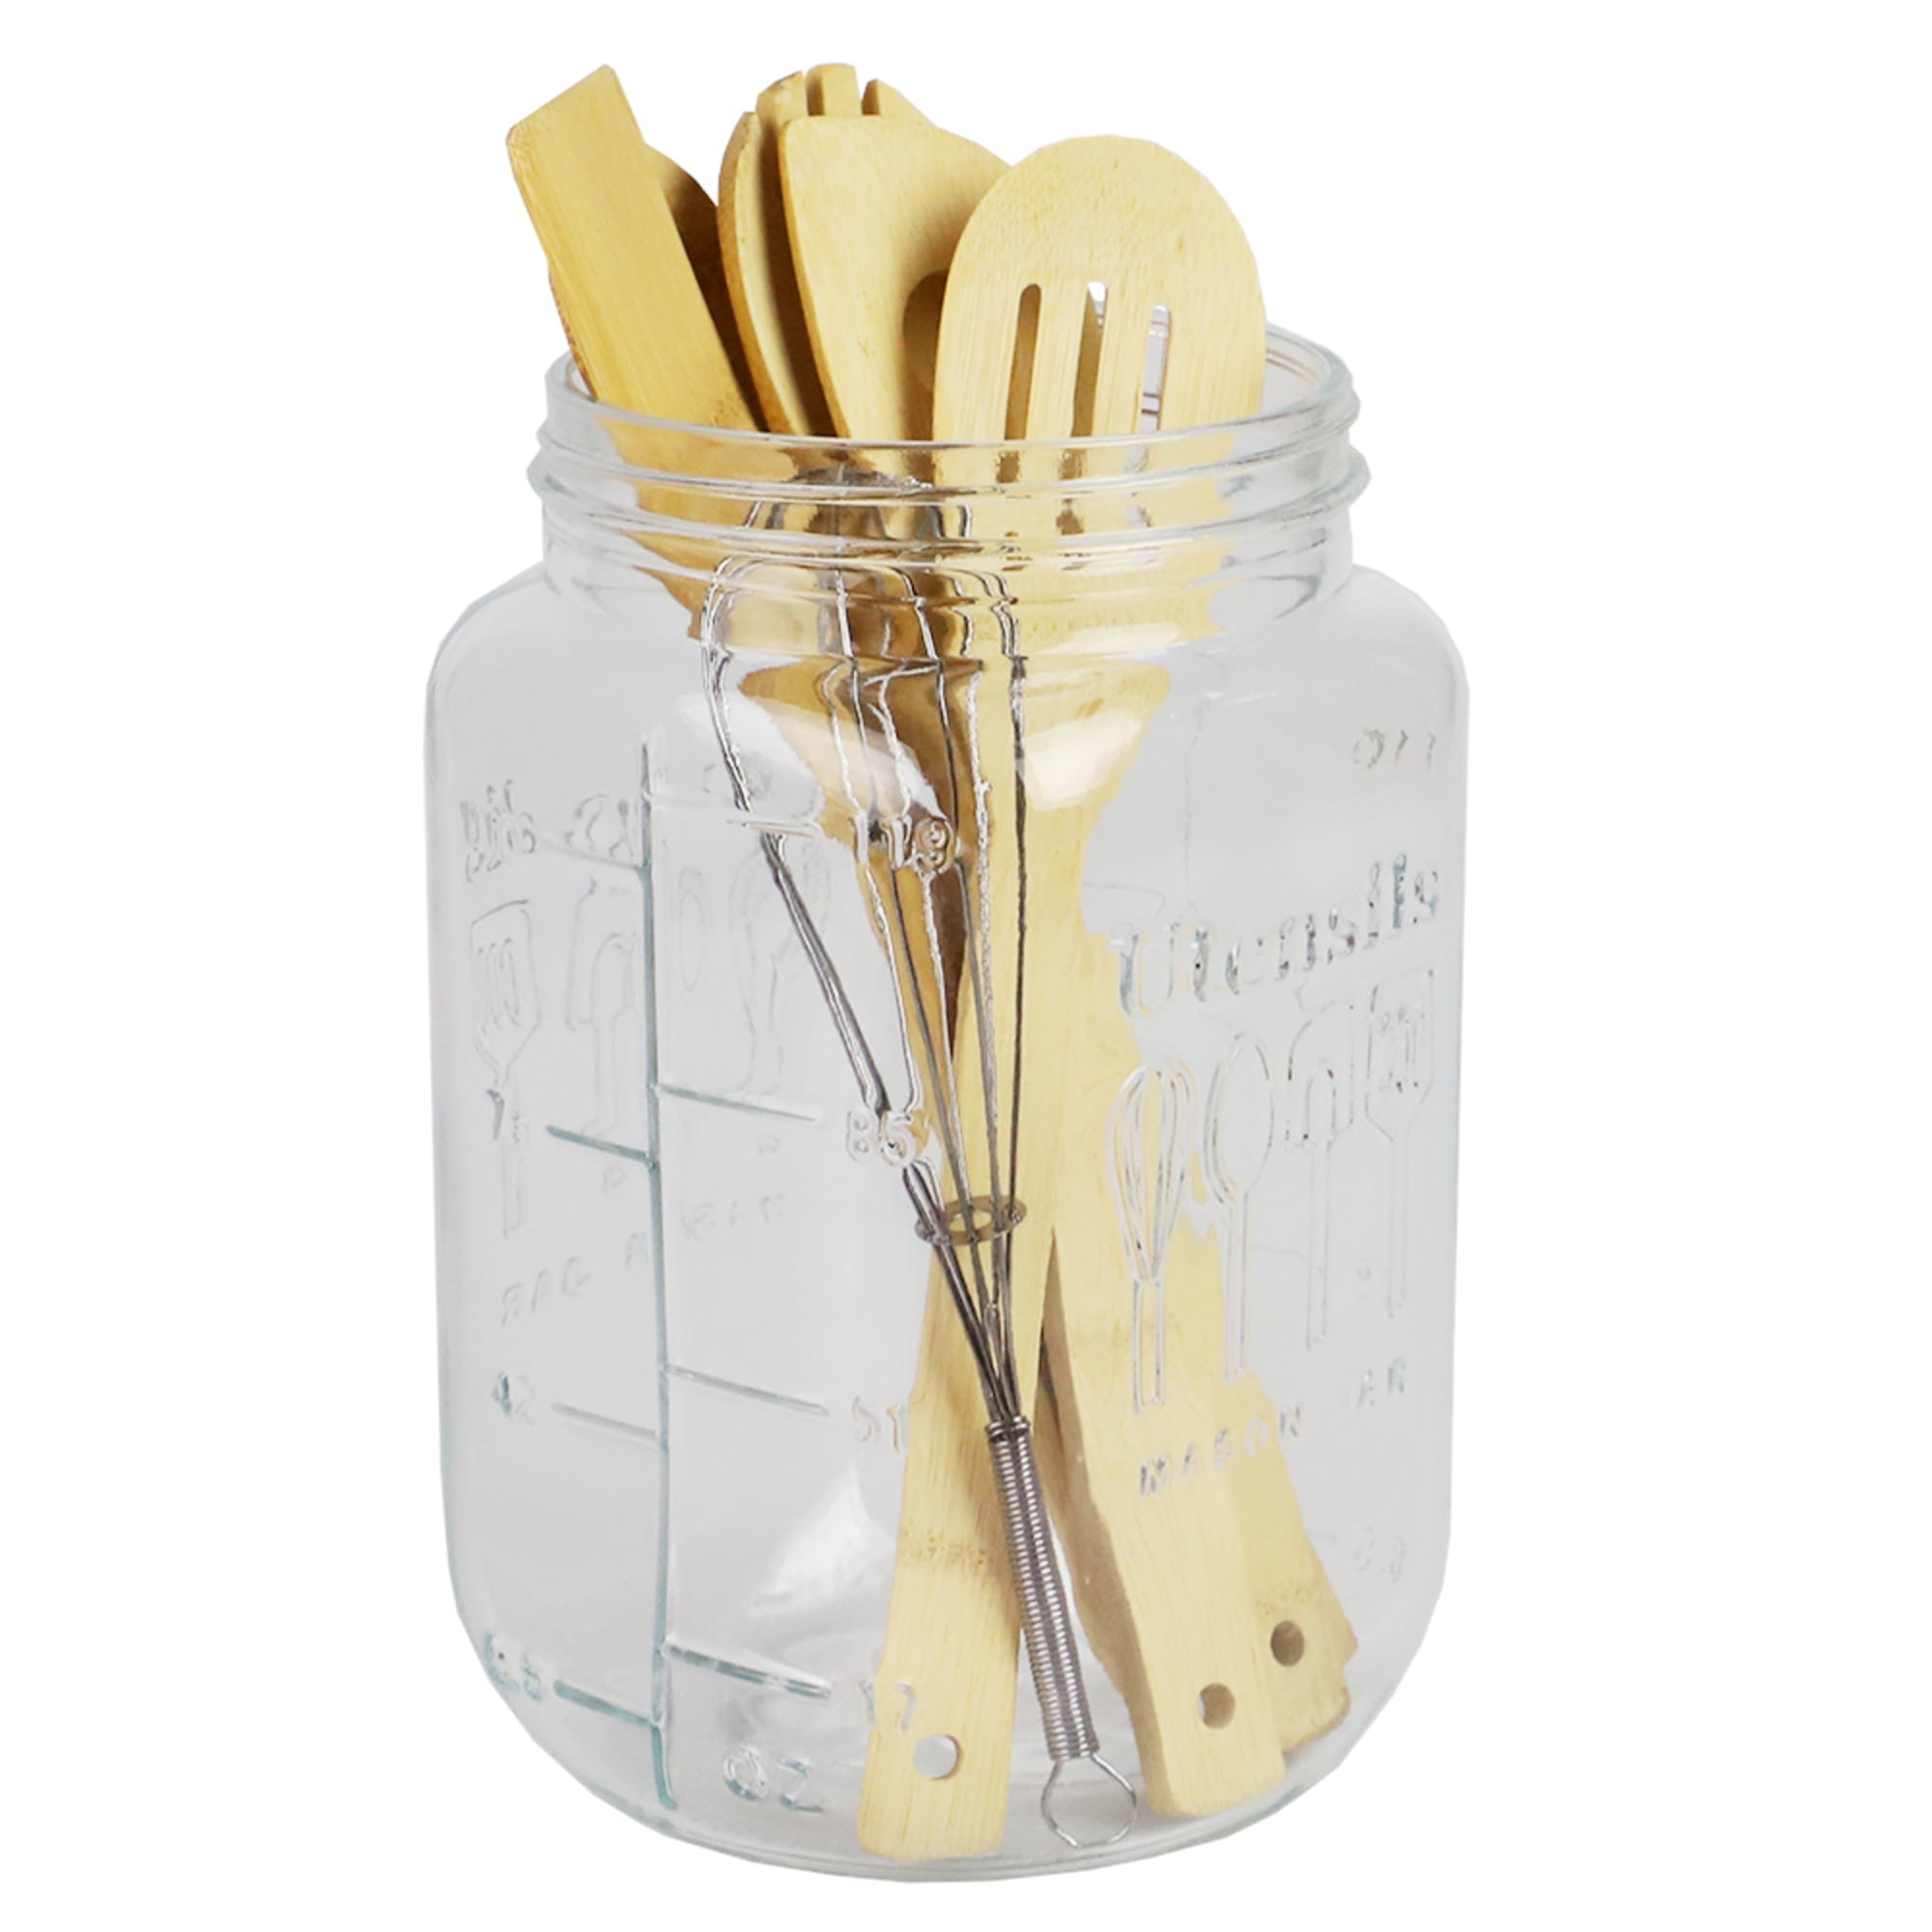 Home Basics 153.6 oz. X-Large  Glass Mason Canister Jar, Clear $7.00 EACH, CASE PACK OF 6